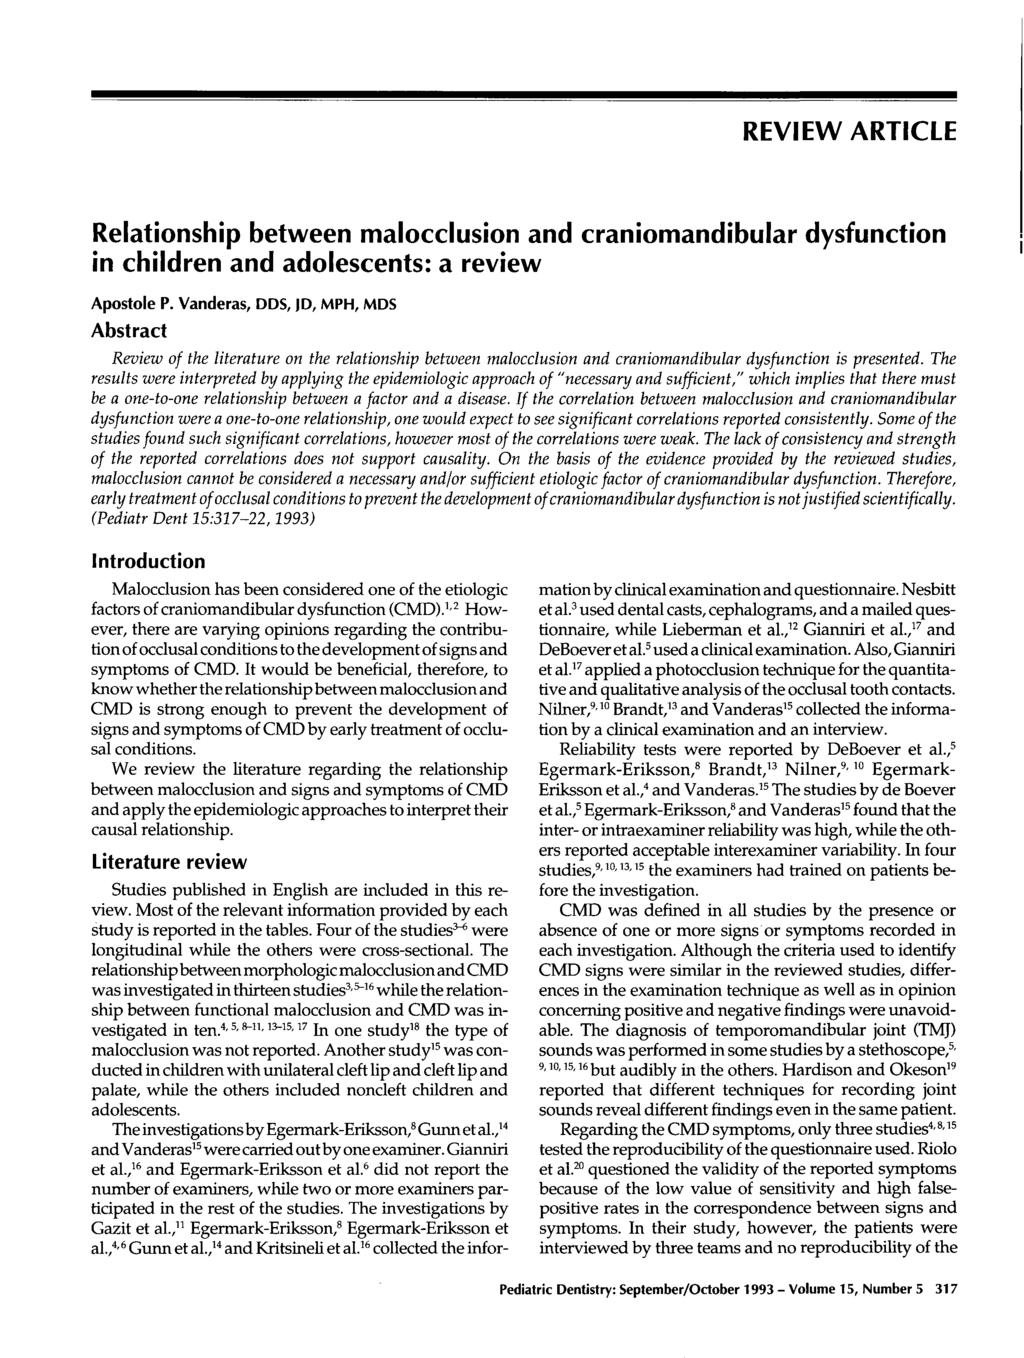 REVIEW ARTICLE Relationship between malocclusion and craniomandibular dysfunction in children and adolescents: a review Apostole P.